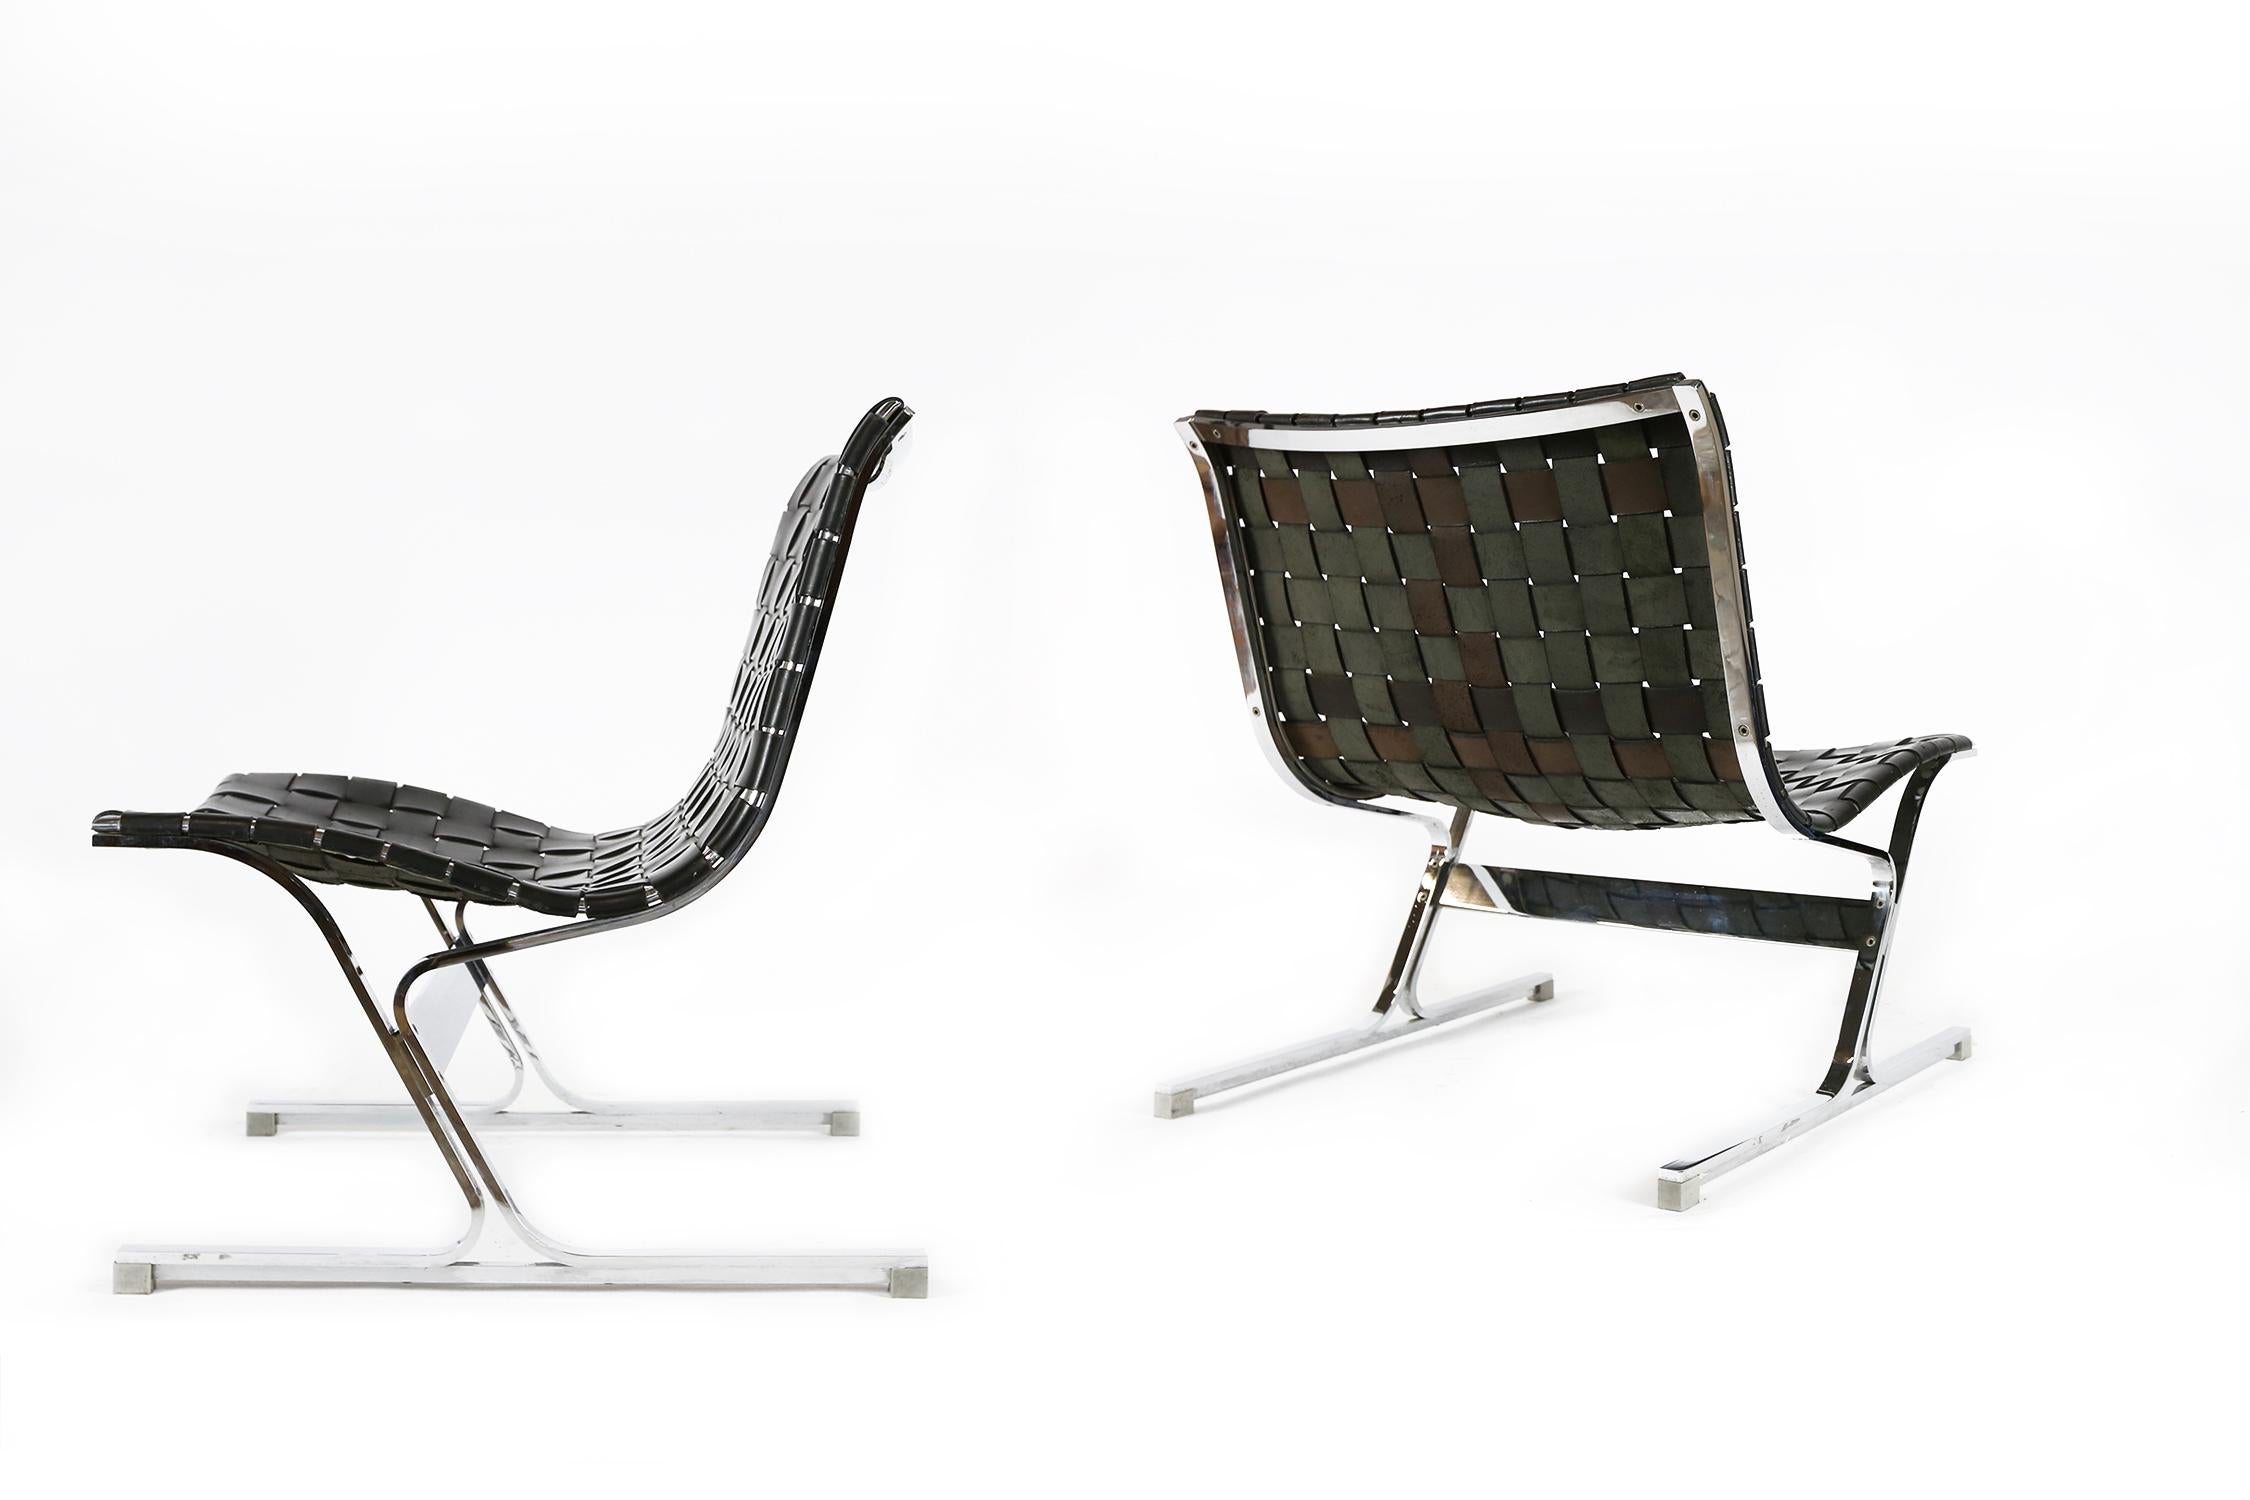 Very nice pair of Luar lounge chairs designed by Ross Littel and manufactured by ICF De Padova, Italy 1965. These amazing lounge chairs are made of chrome-plated solid metal frames with black leather straps that are still original and have a nice